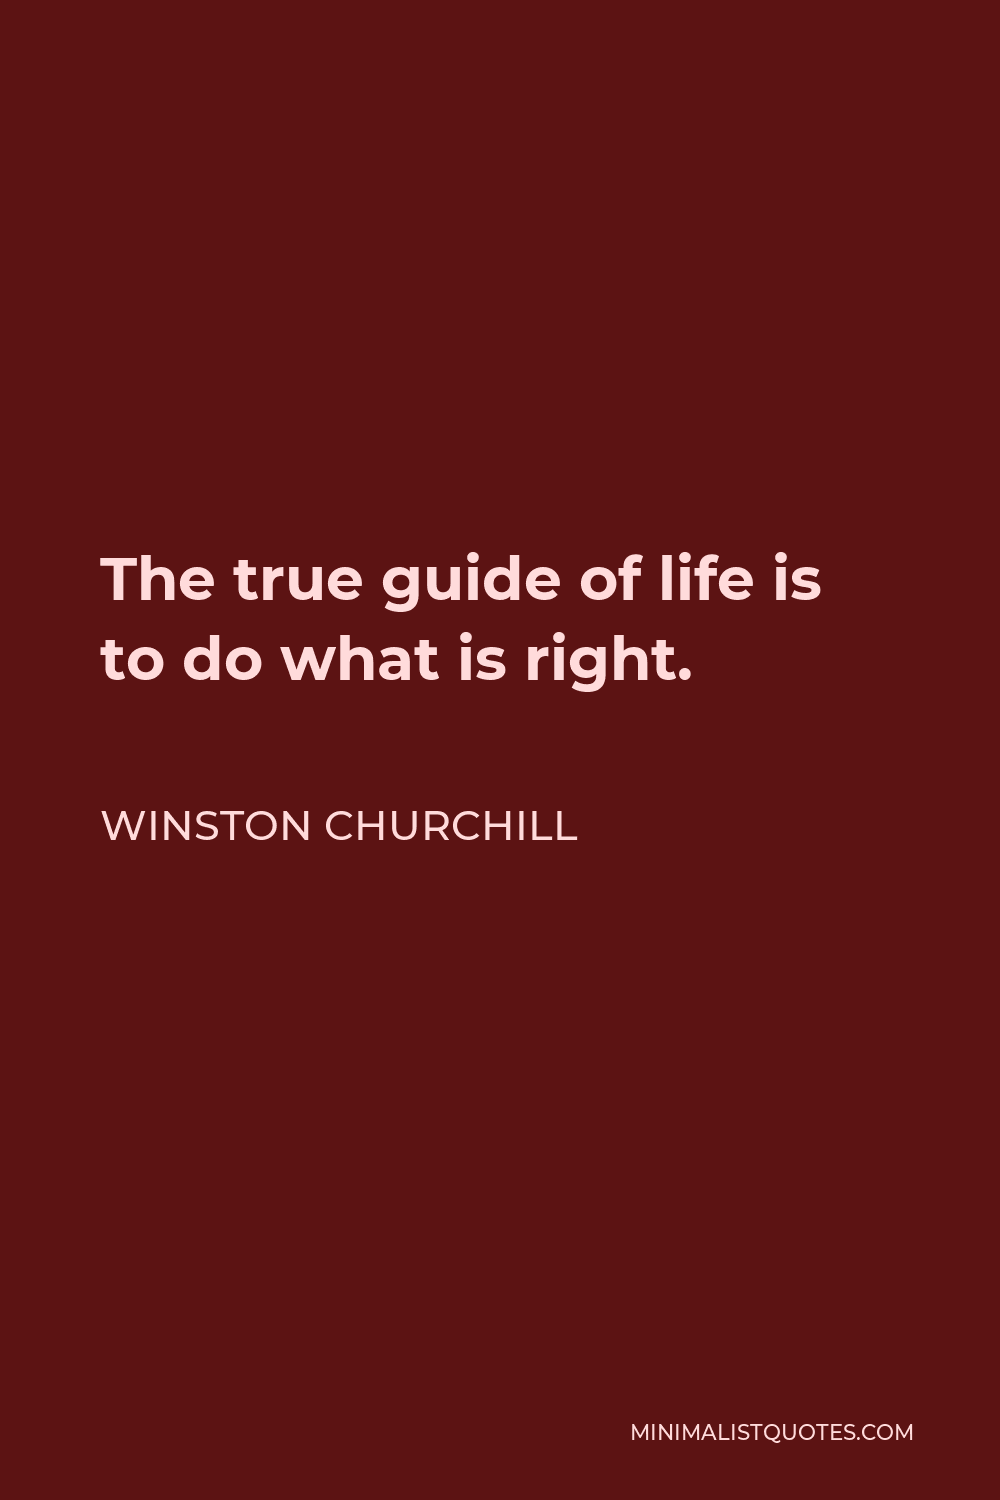 Winston Churchill Quote - The true guide of life is to do what is right.